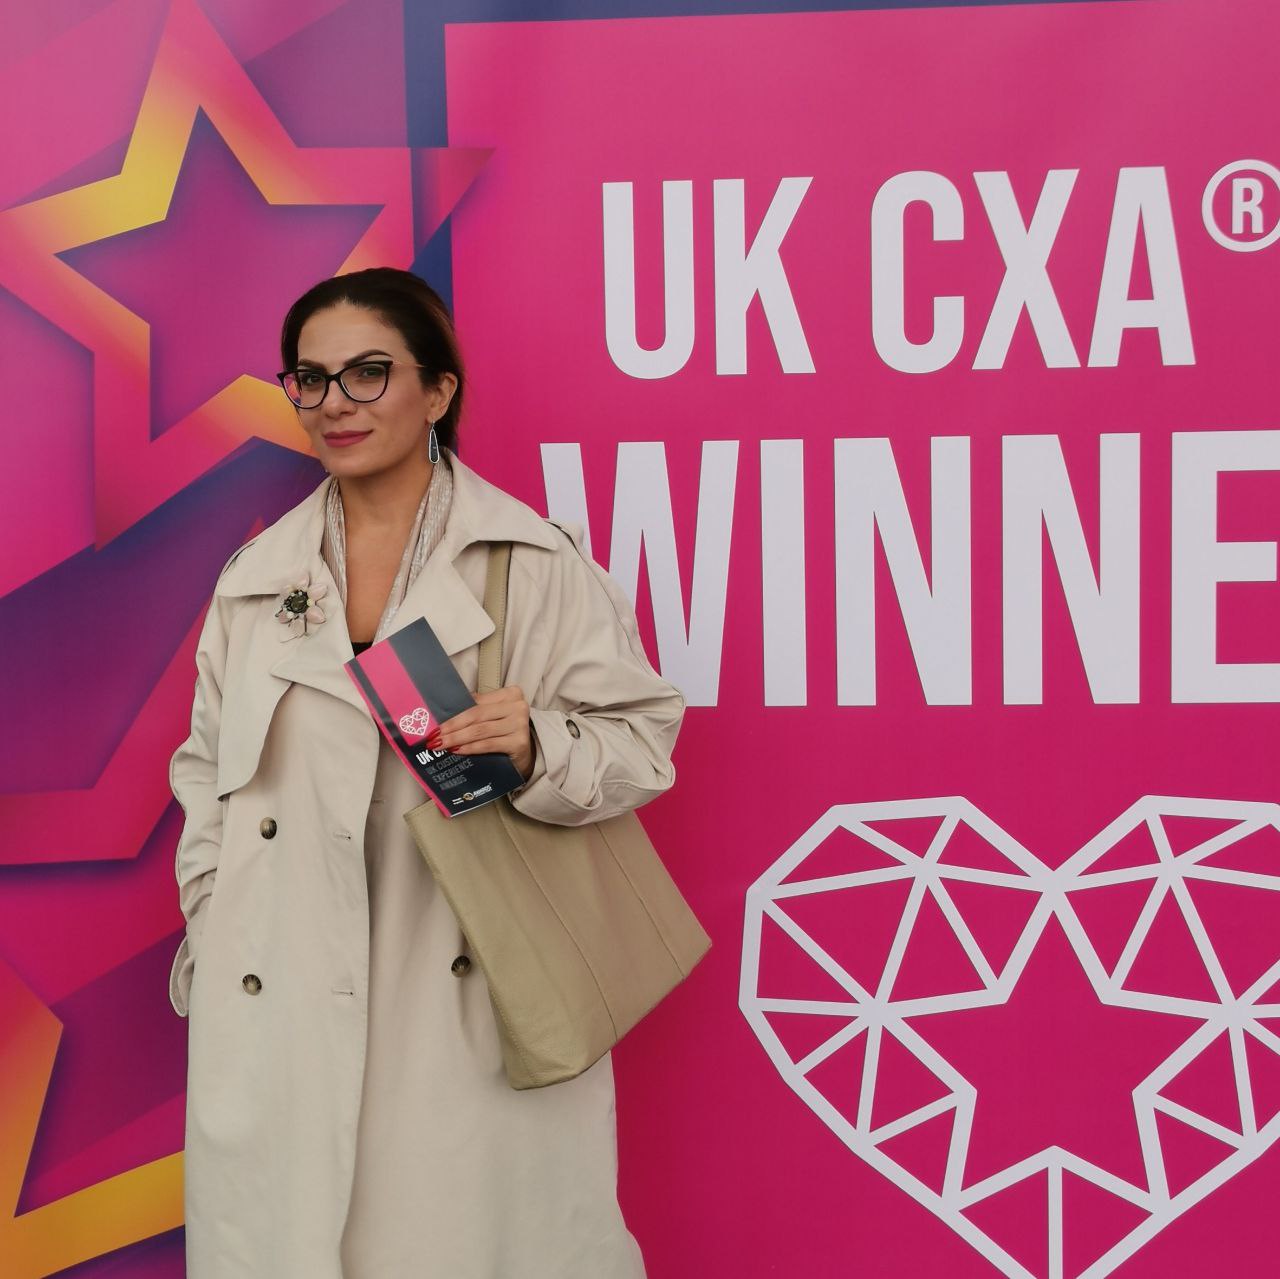 You are currently viewing Whitebone CEO participated in the UK CX Awards 2022<br><br><br>